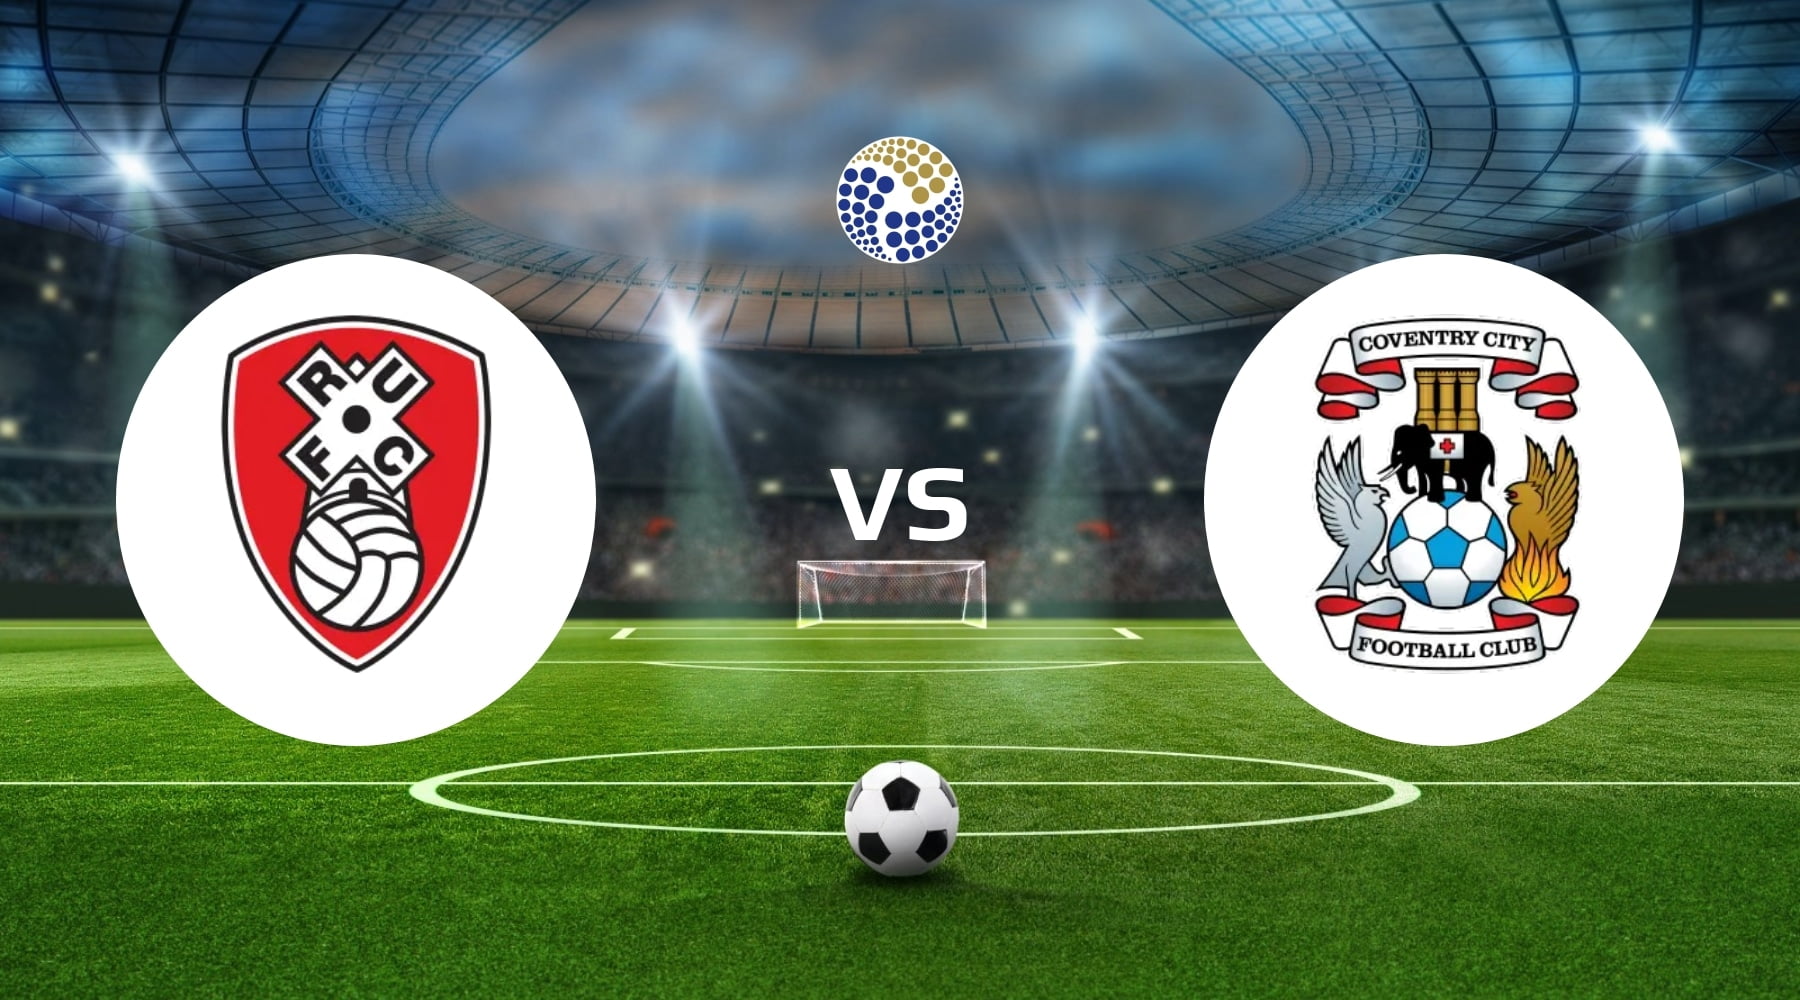 Rotherham United vs Coventry City Betting Tips & Prediction